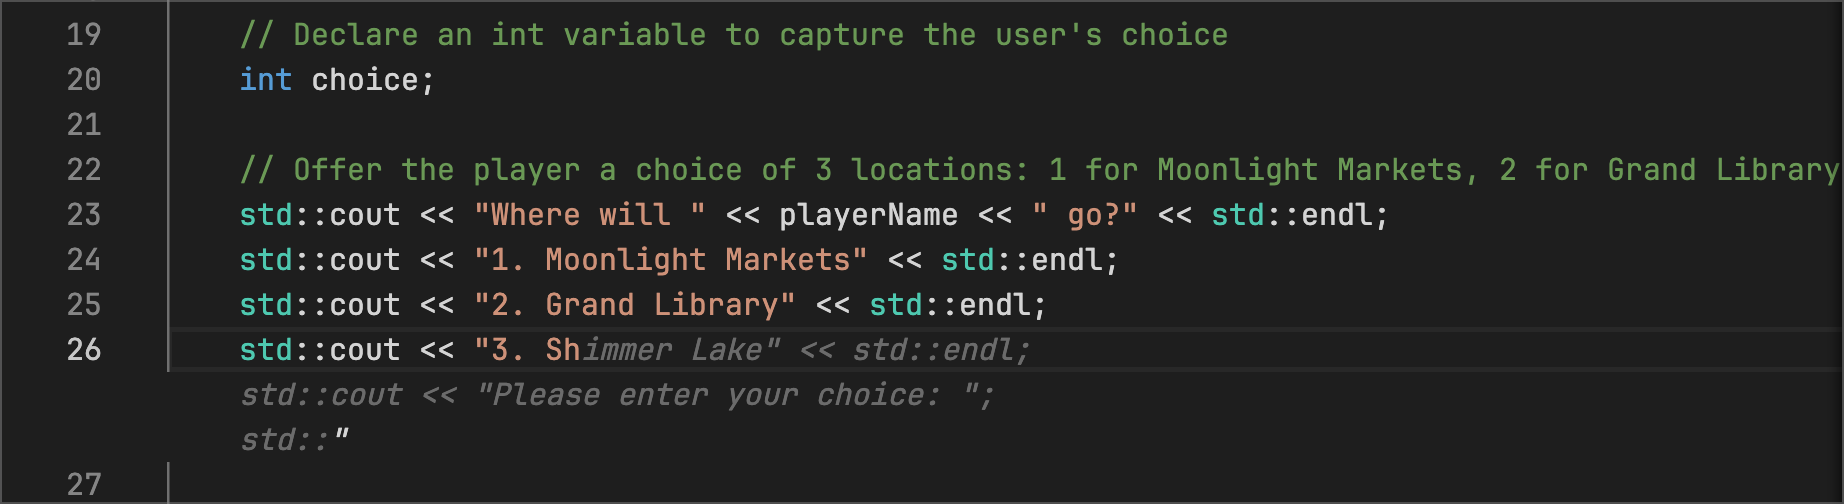 adventure.cpp - Code Suggestions suggests a multiline output for all the locations listed in the code below